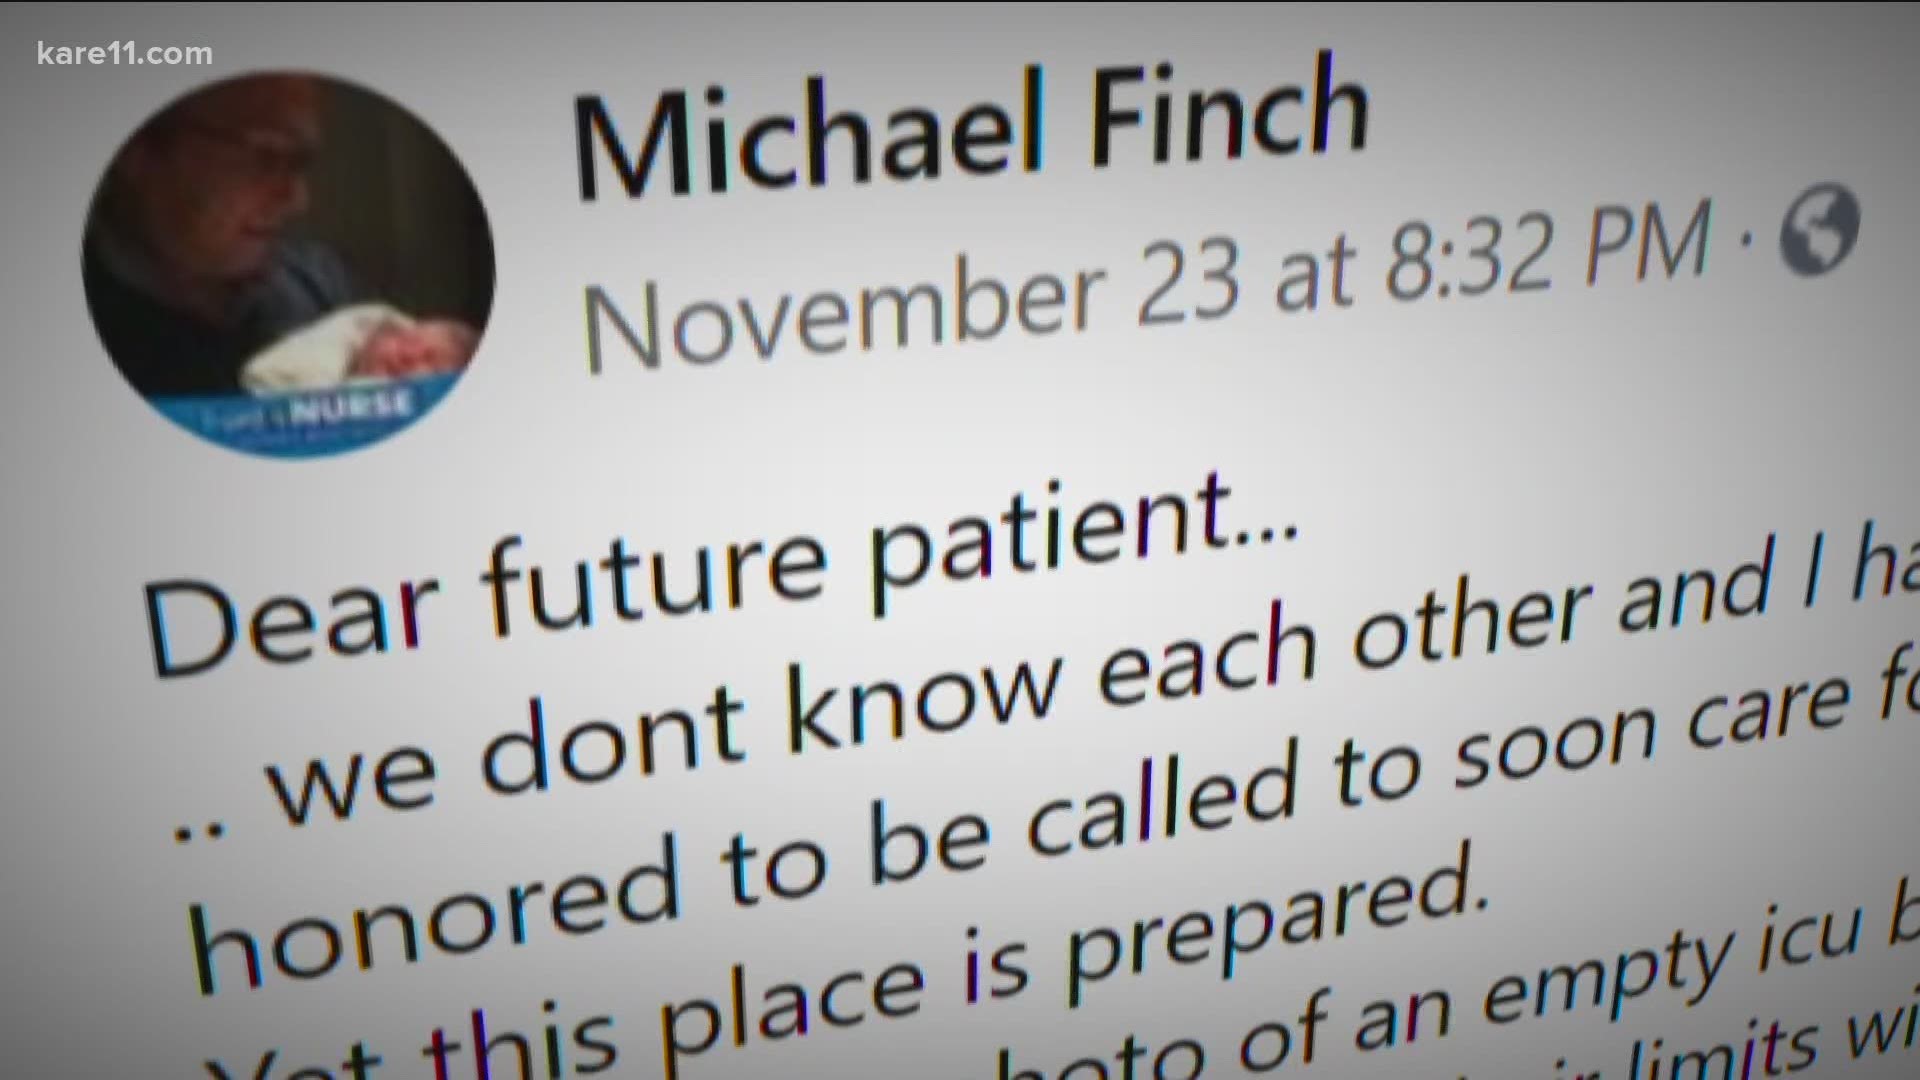 Nurse practitioner Michael Finch posted the letter on Facebook, then read it aloud on "Breaking the News."